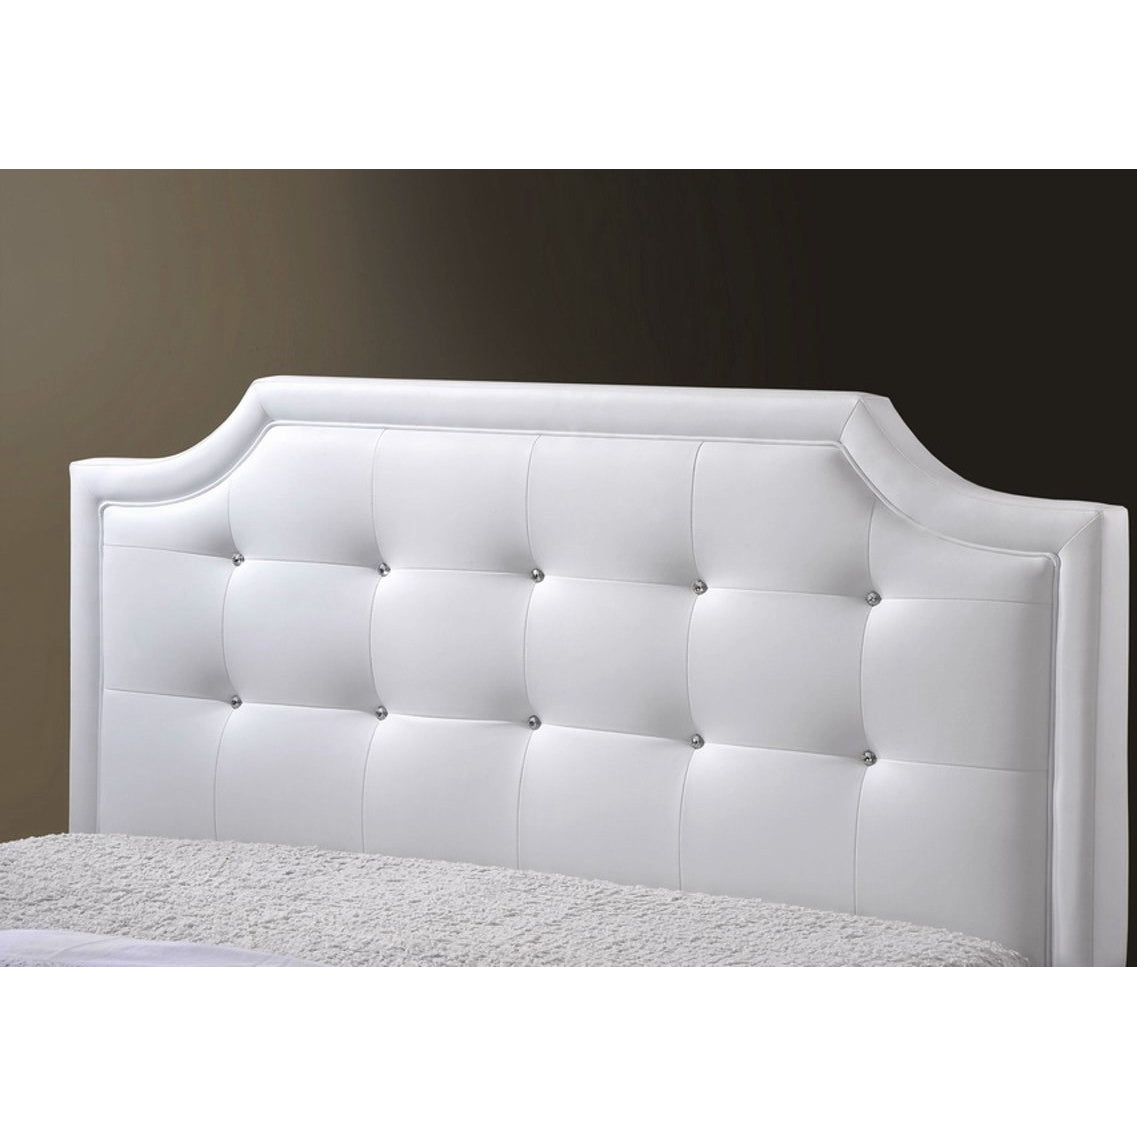 Baxton Studio Carlotta White Modern Bed with Upholstered Headboard - Full Size Baxton Studio-beds-Minimal And Modern - 2